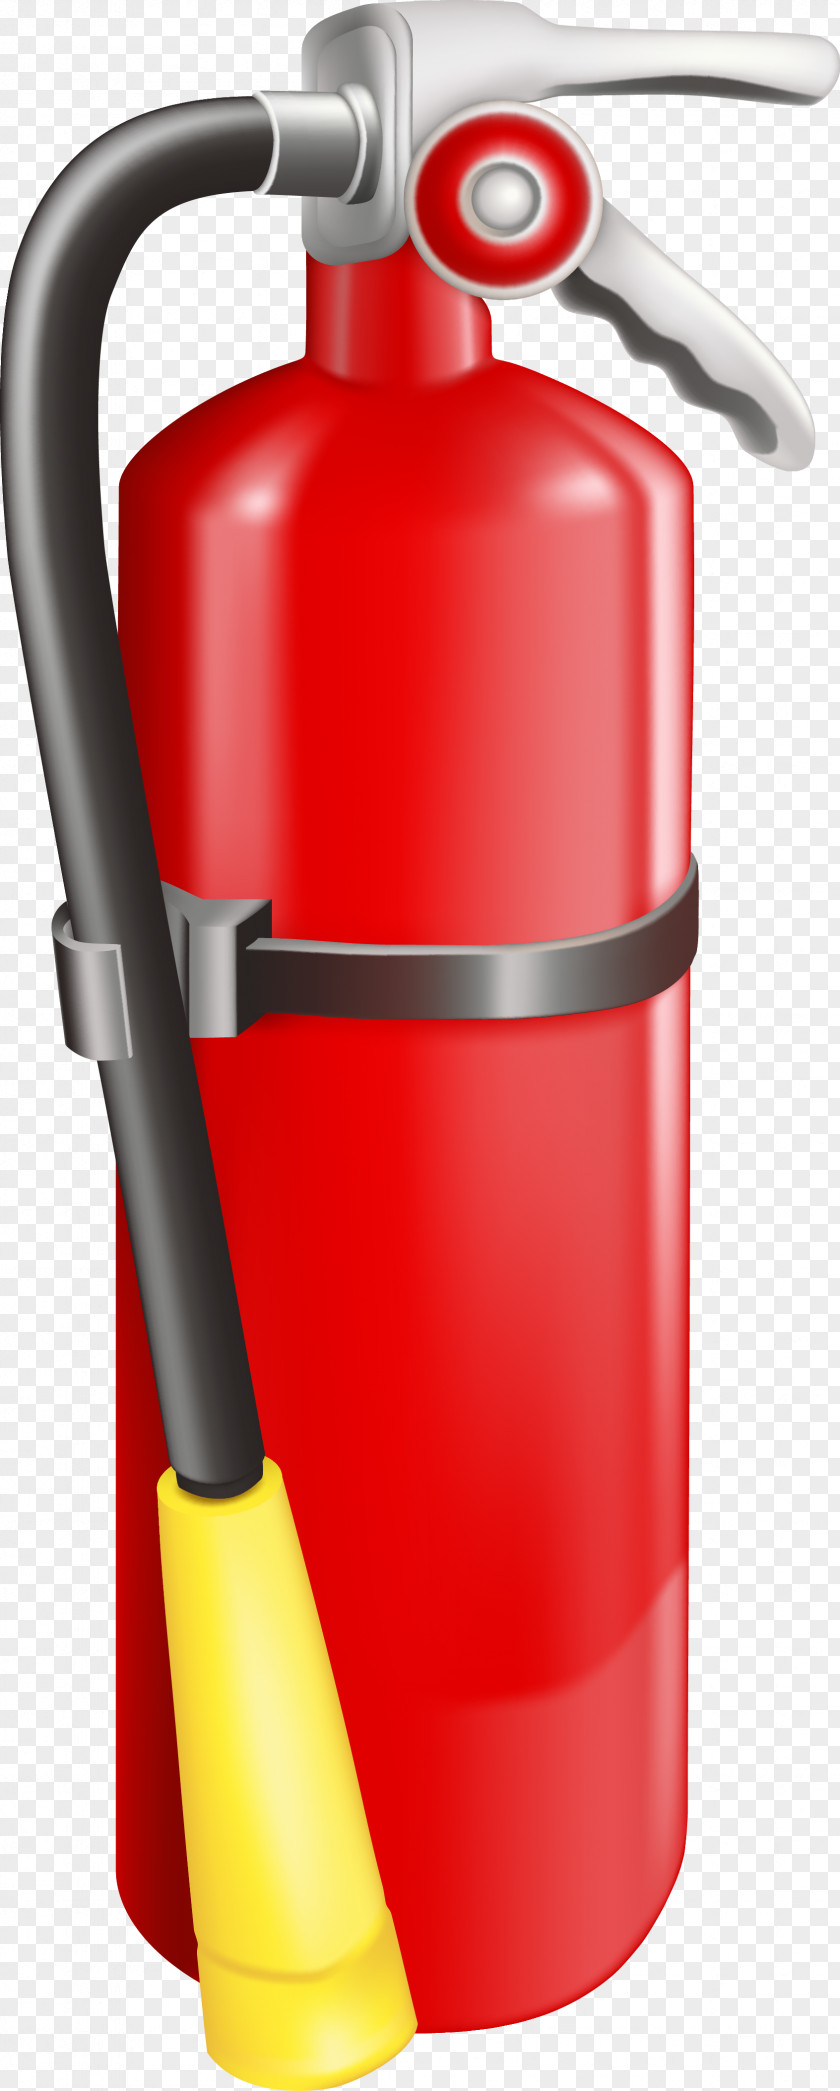 Safety Fire Extinguisher Firefighting Firefighter Equipment Manufacturers' Association PNG